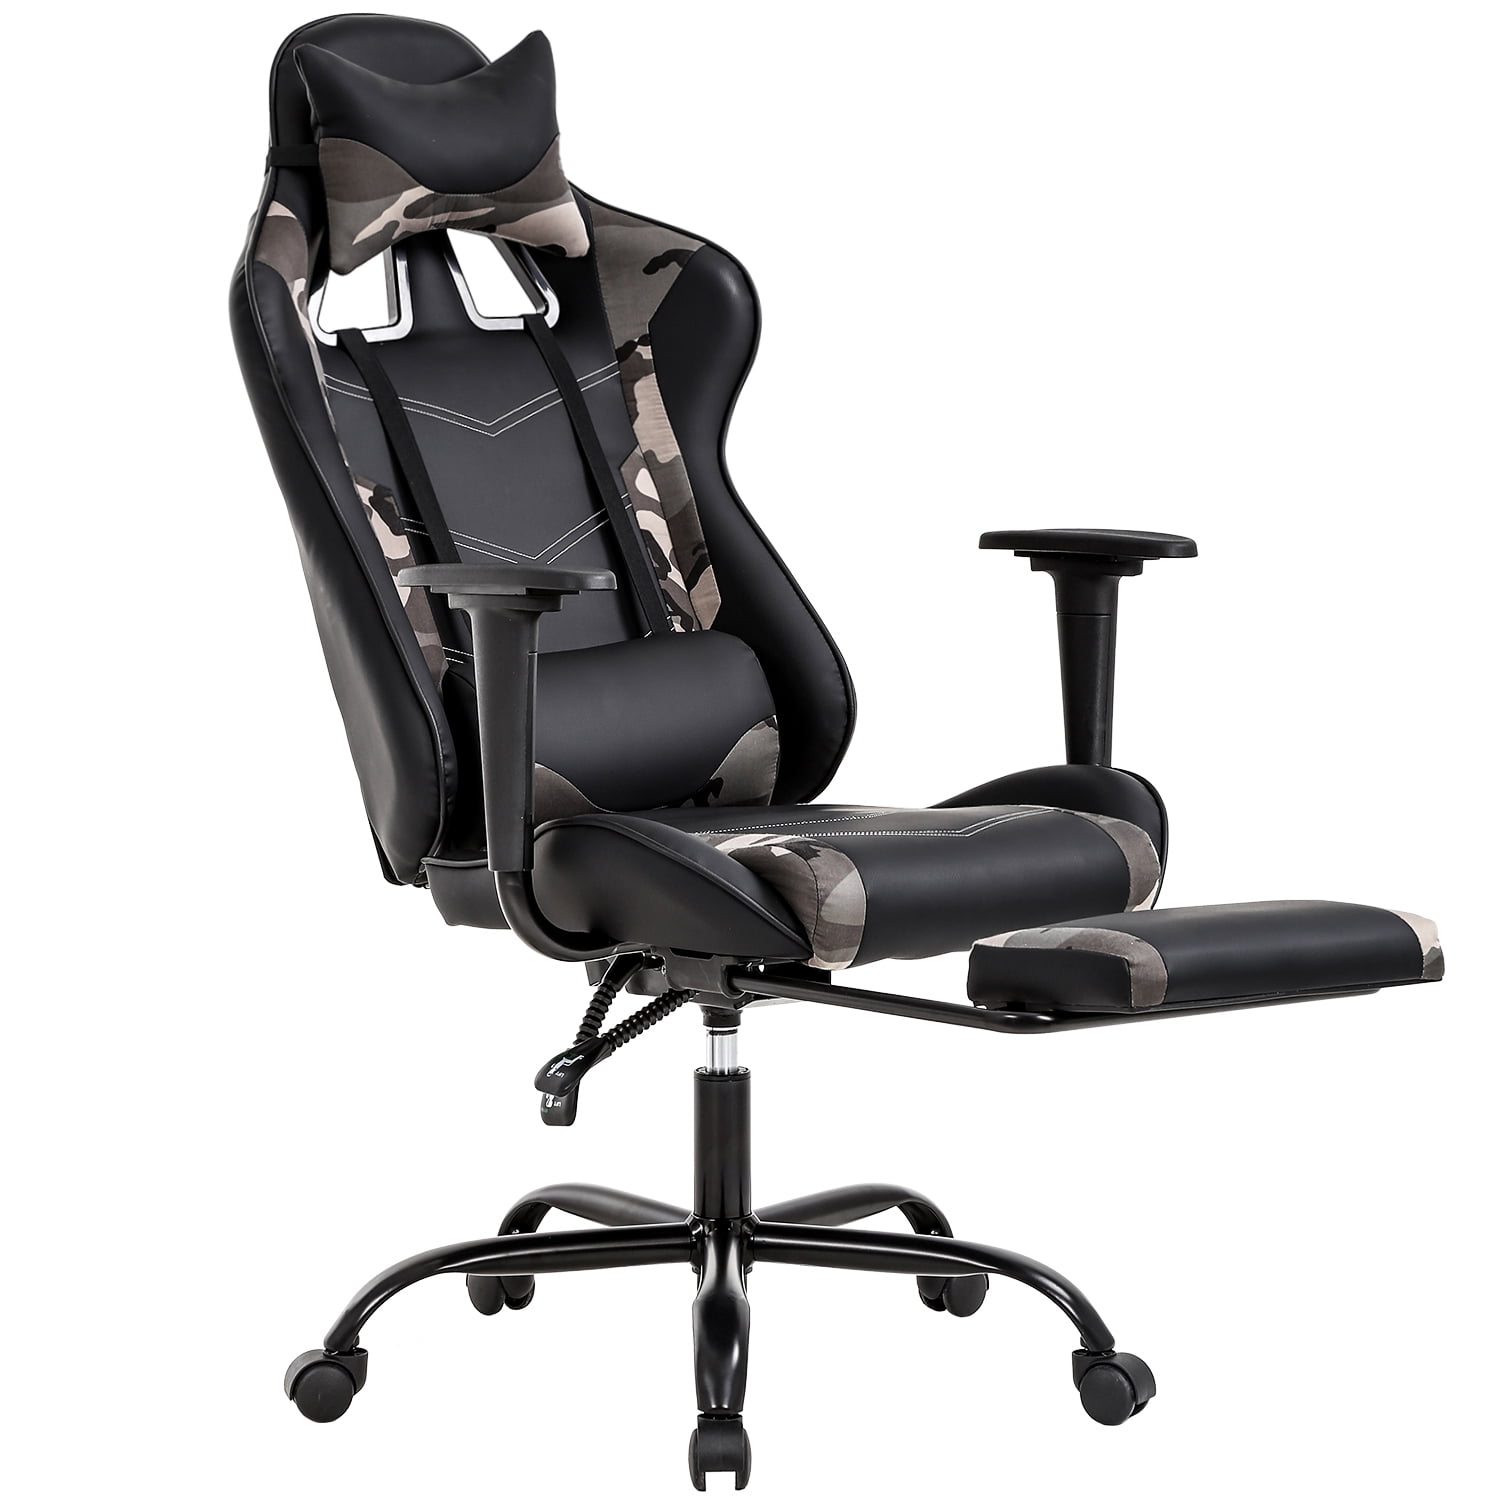 Office Gaming Chair Ergonomic Executive Computer Desk Chair Swivel PU Leather 